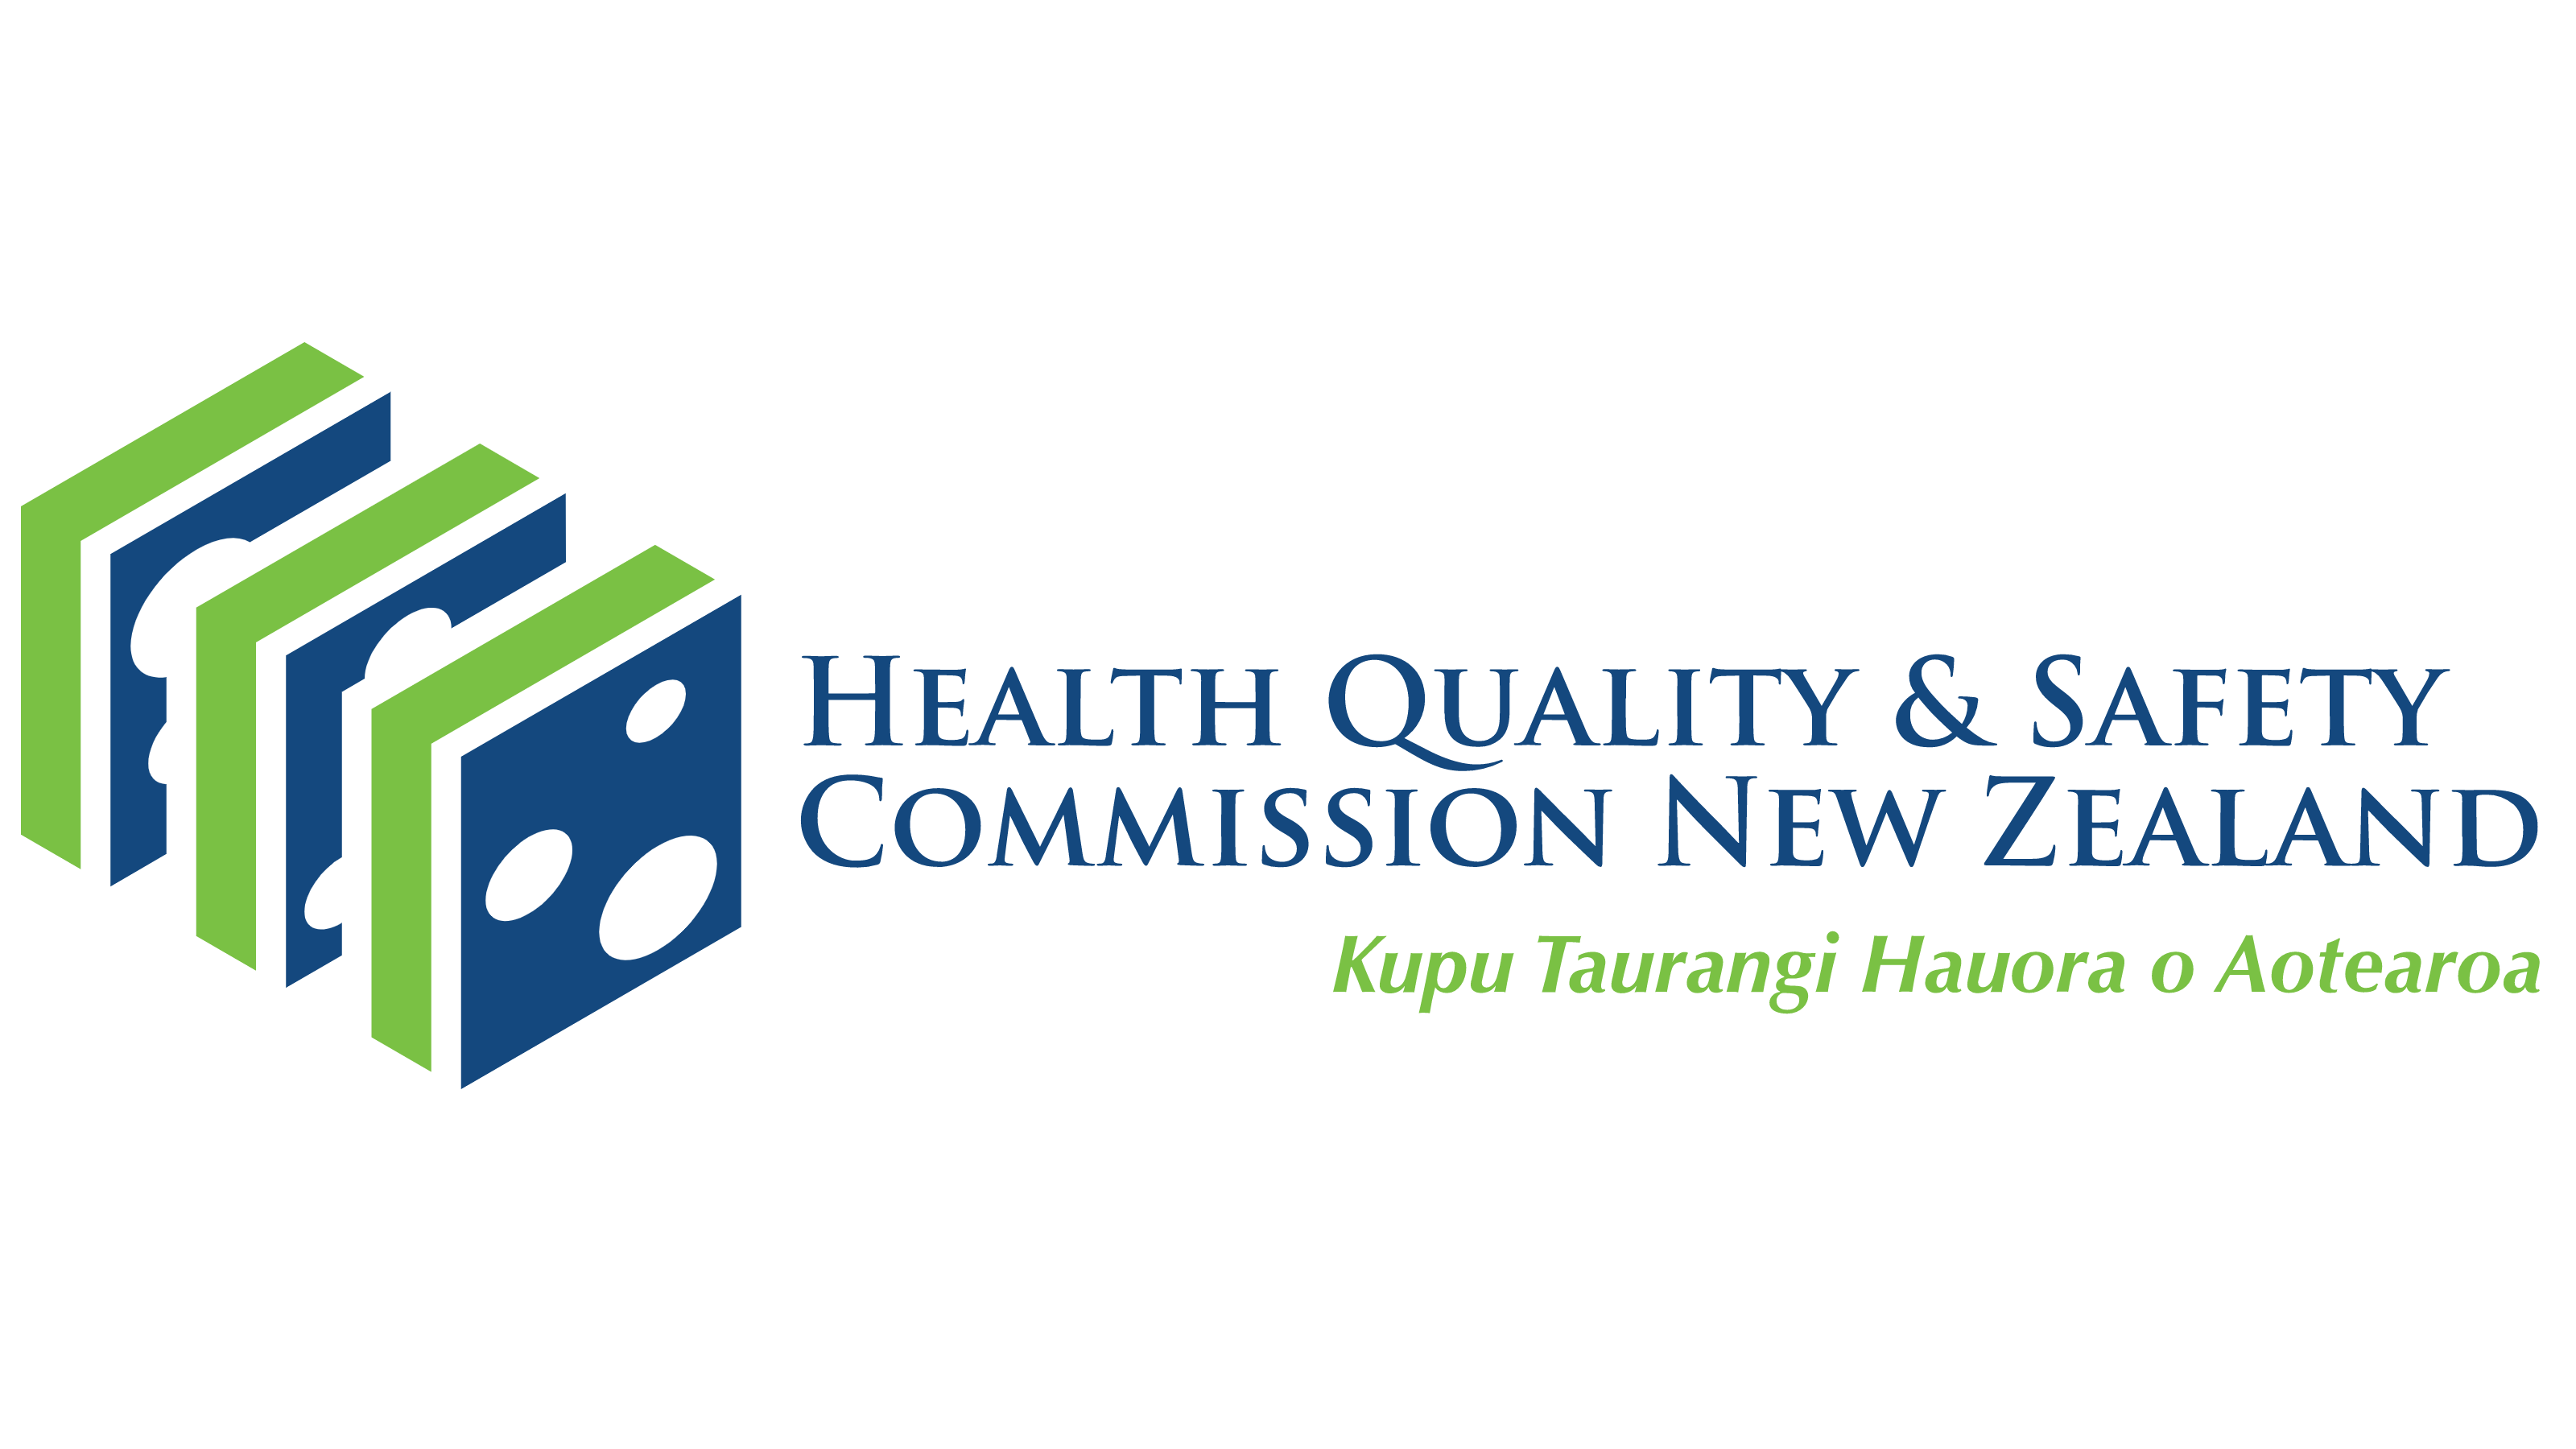 Health Quality & Safety Commission New Zealand logo